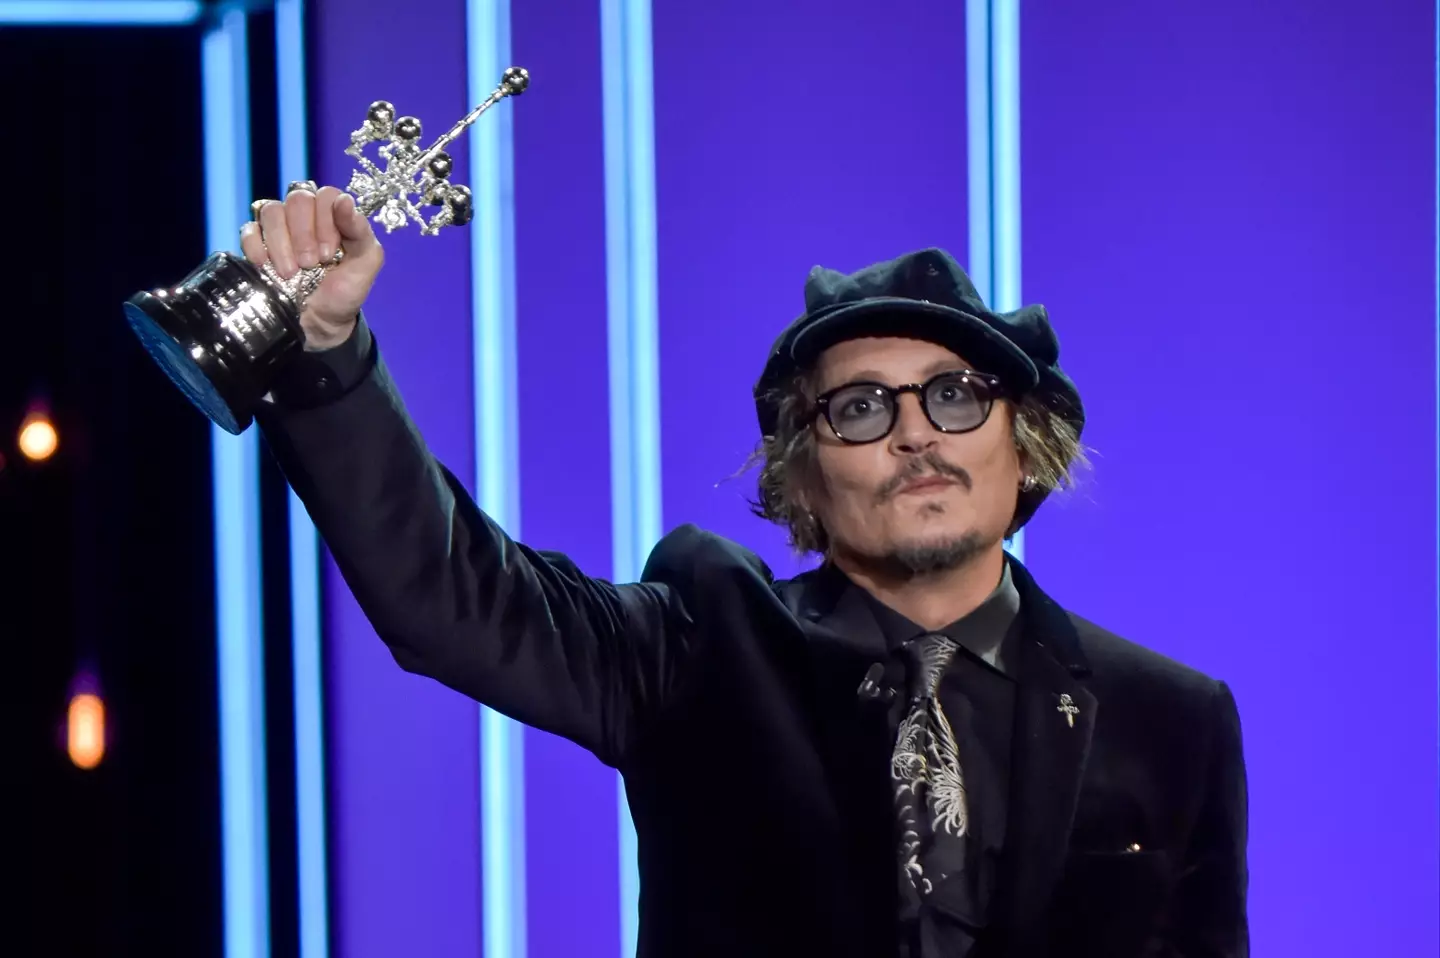 Johnny Depp has received global acclaim for his legendary acting roles. (Juan Naharro Gimenez/WireImage)